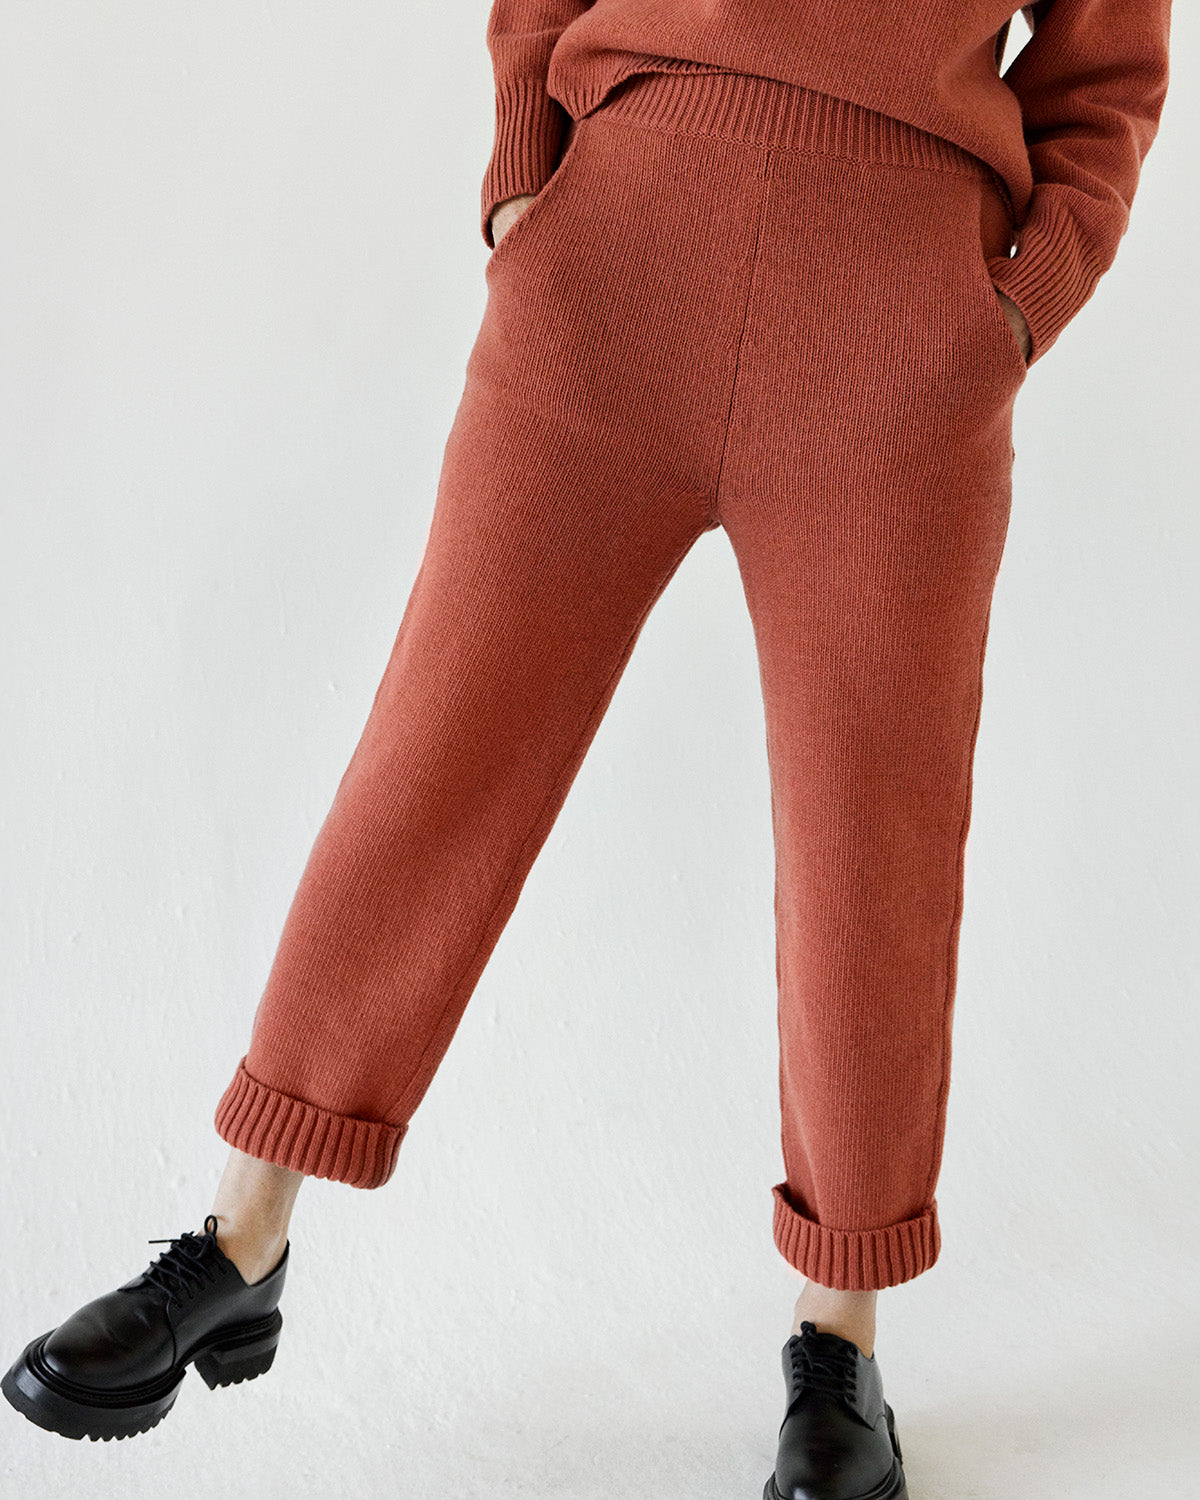 Maelle Reclaimed Wool Pants – Eco-Friendly and Ethical Clothing